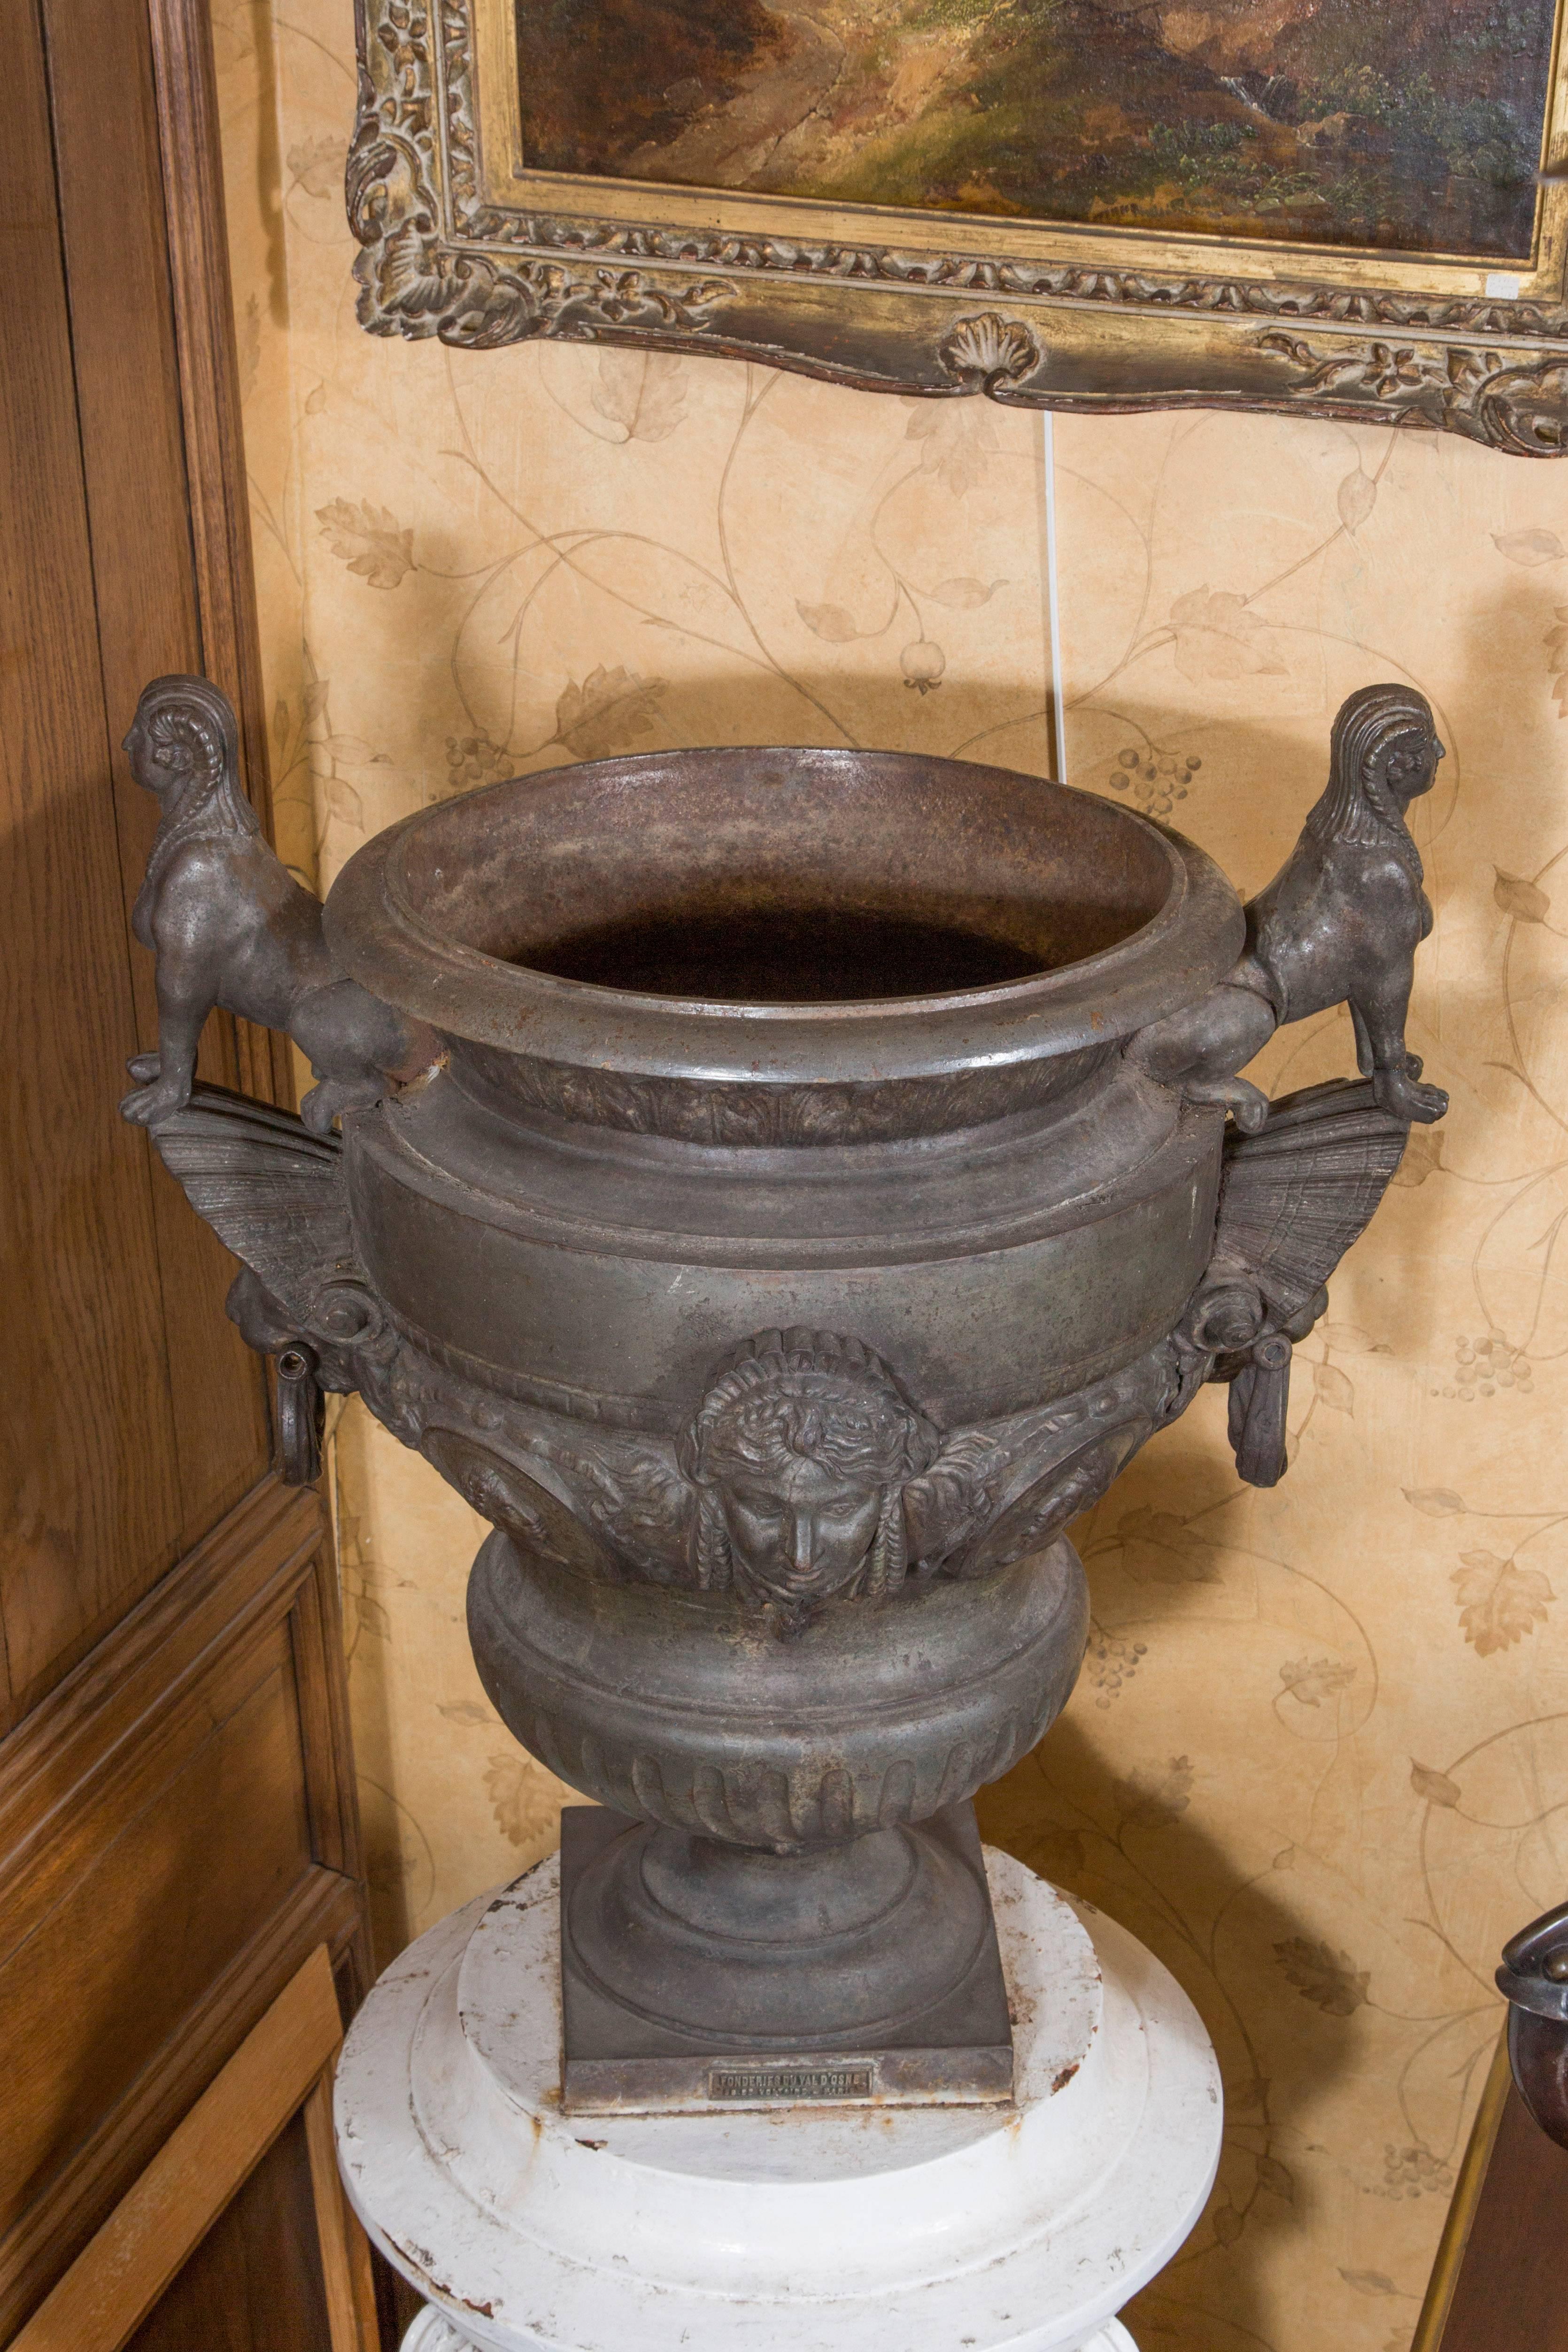 20th Century Iron Ornamental Bowl on Base Frieze Deeply Gadrooned Sphinges and Lions Handles